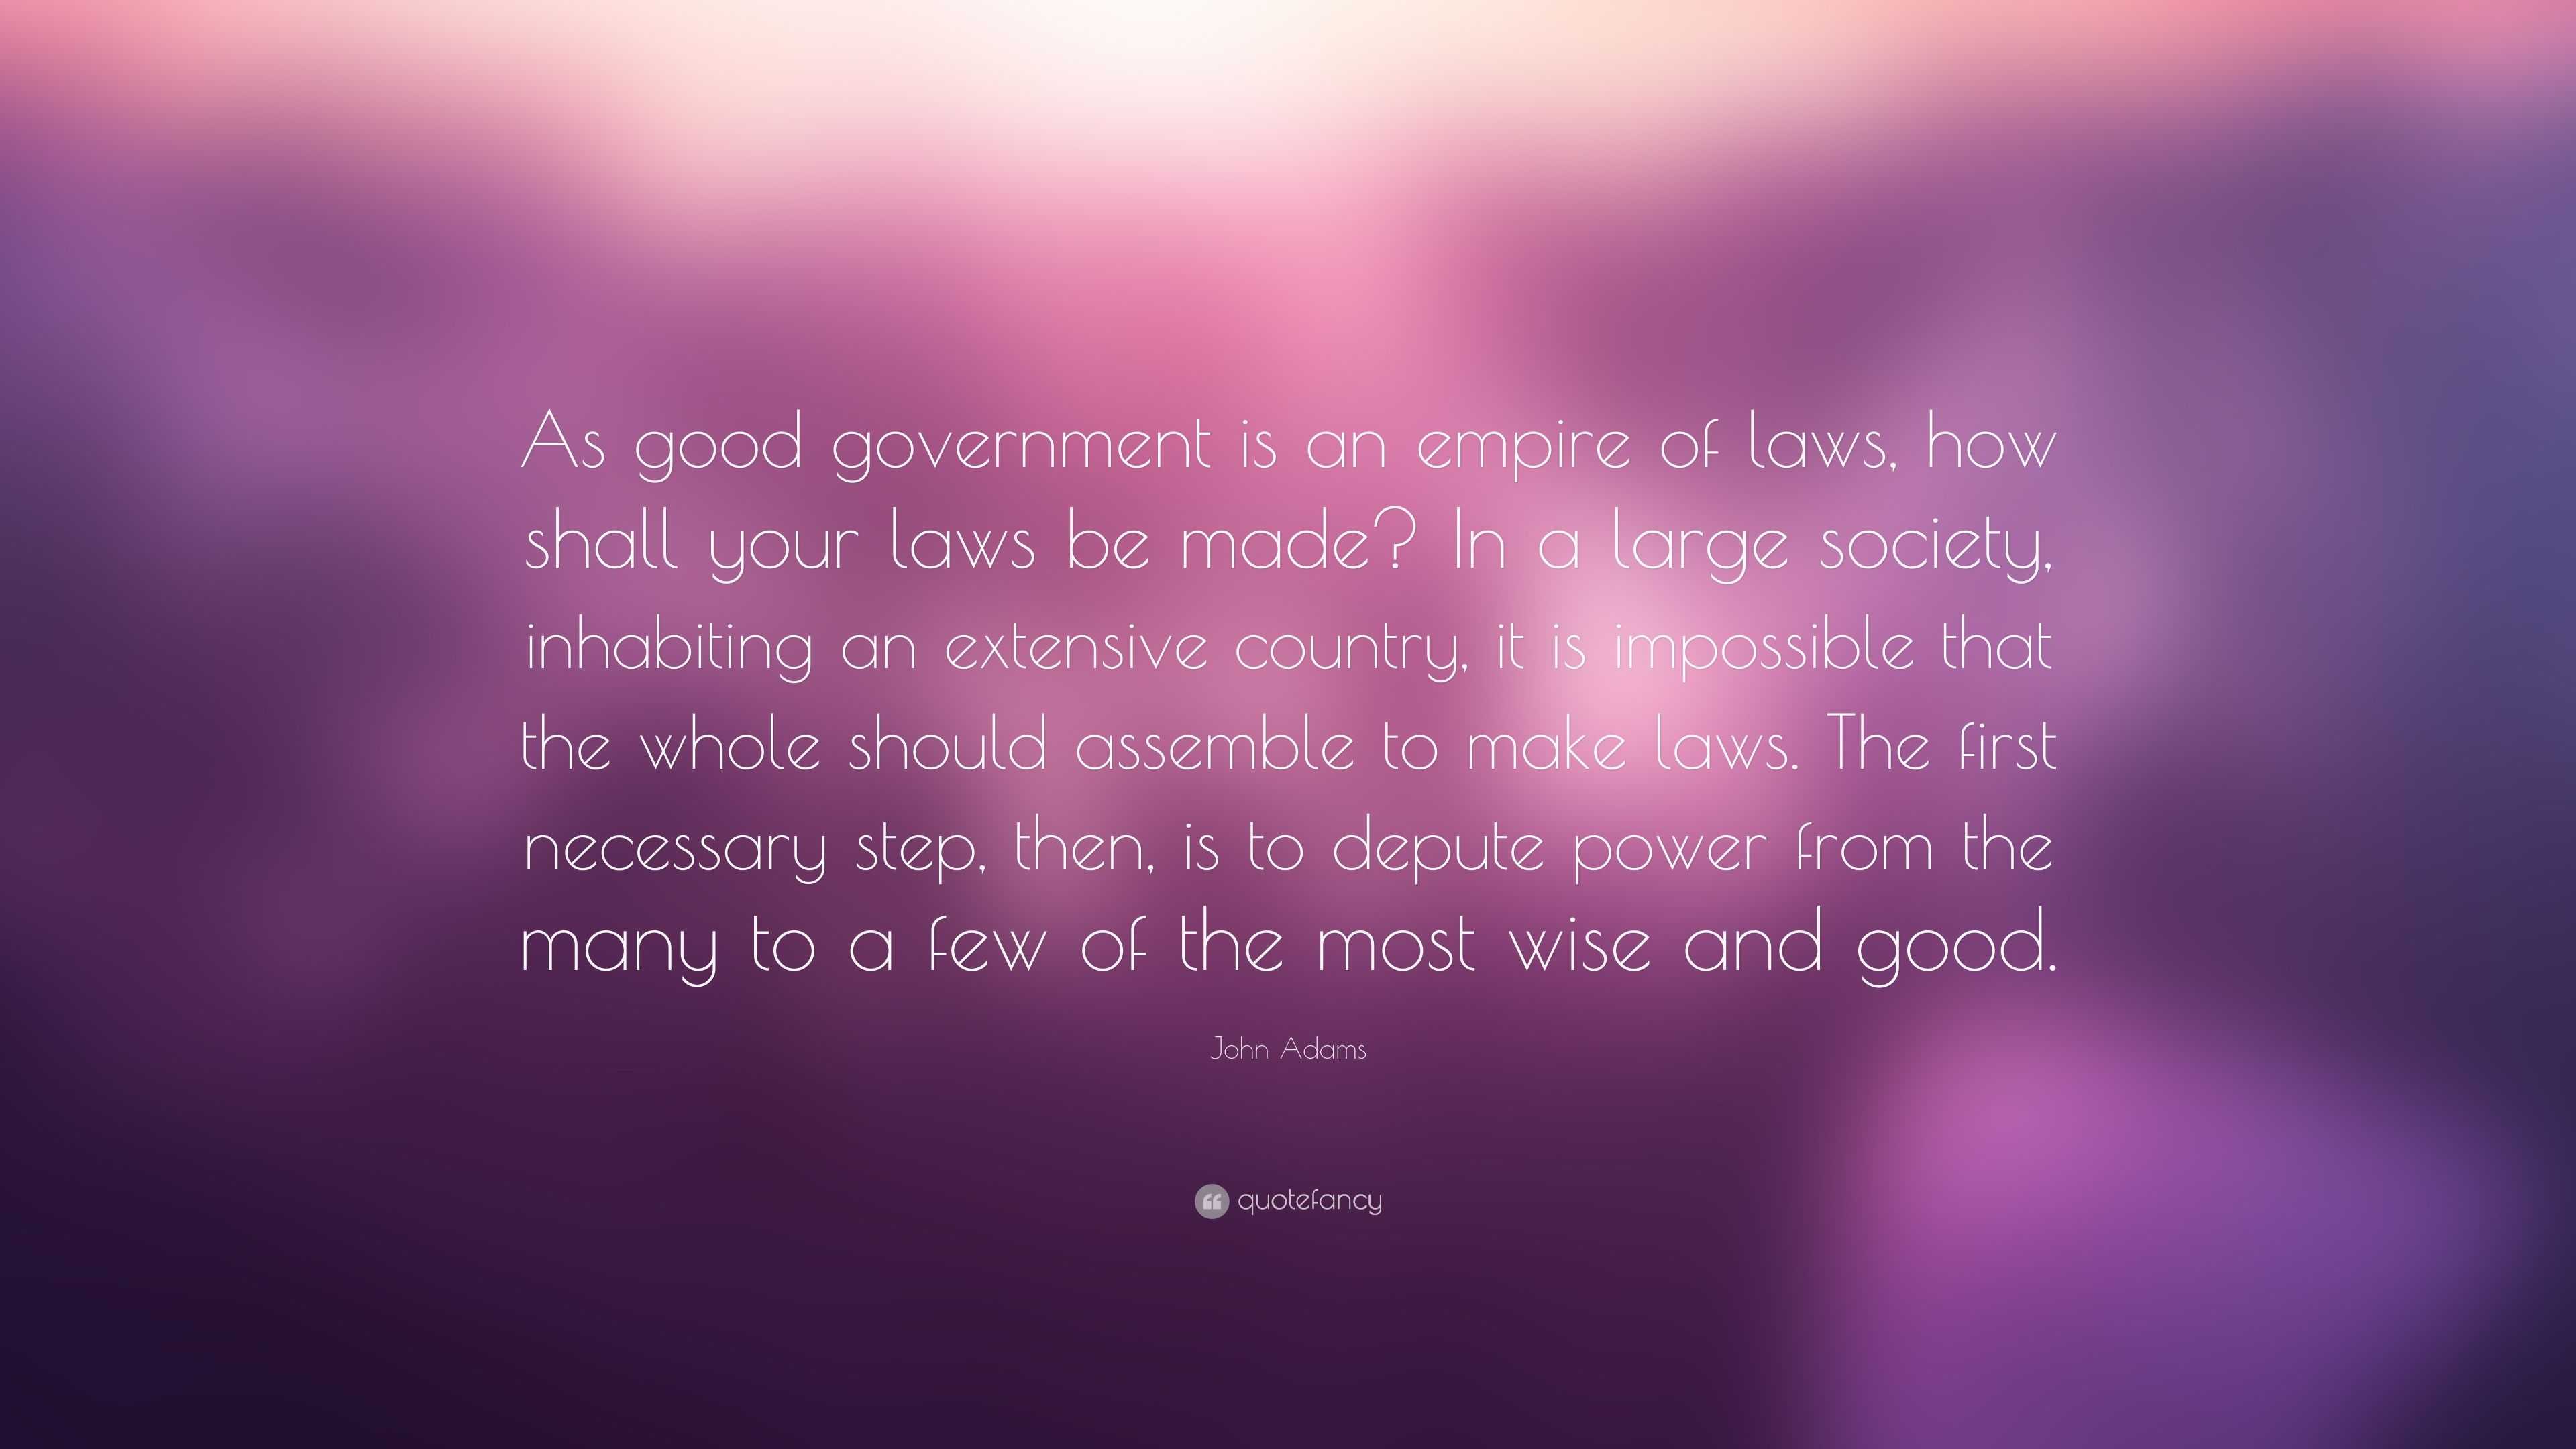 John Adams Quote: “As good government is an empire of laws, how shall ...